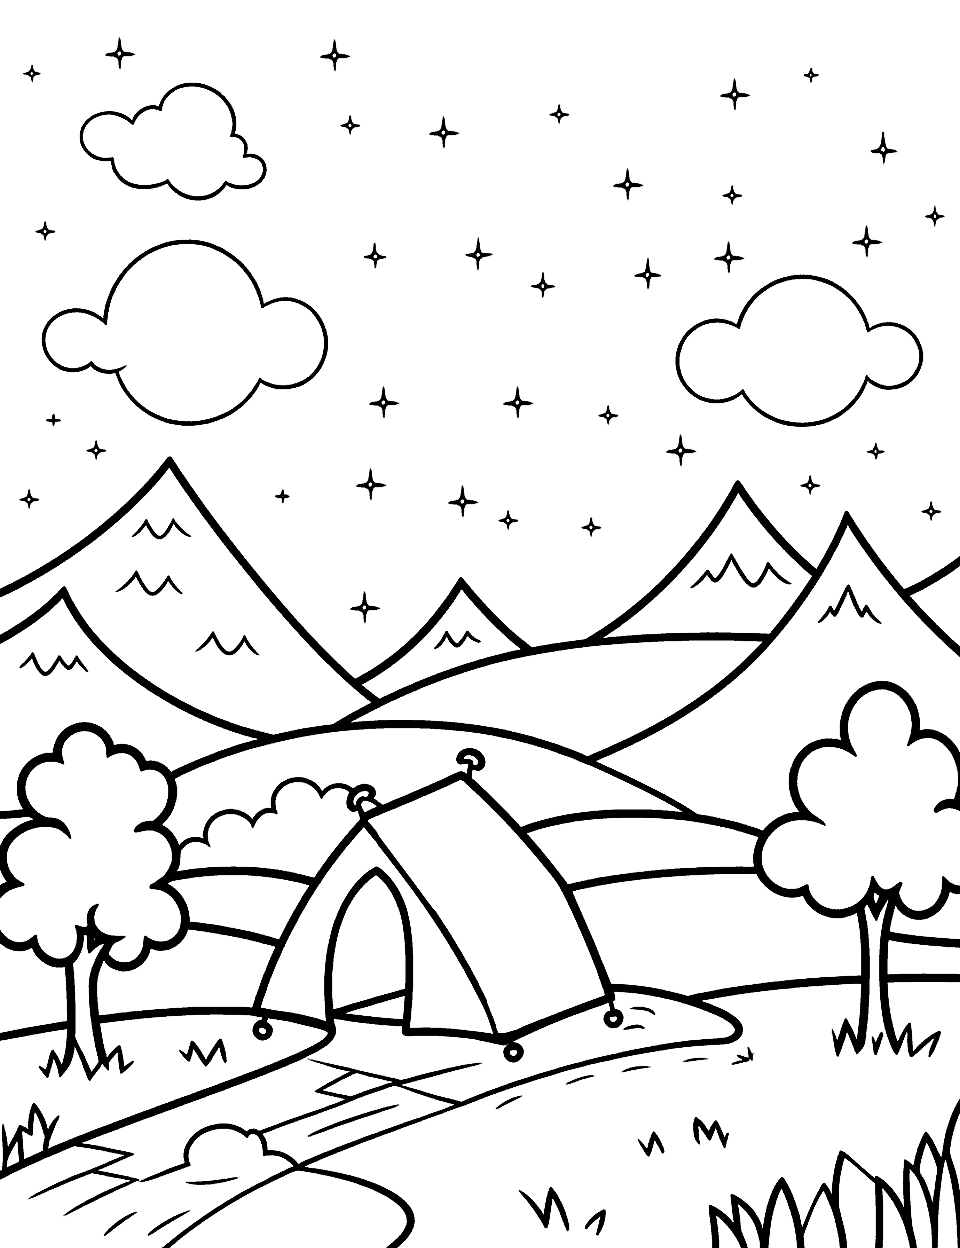 Starry Night Camping Scene Nature Coloring Page - A tent set up under a sky full of stars in the wilderness.